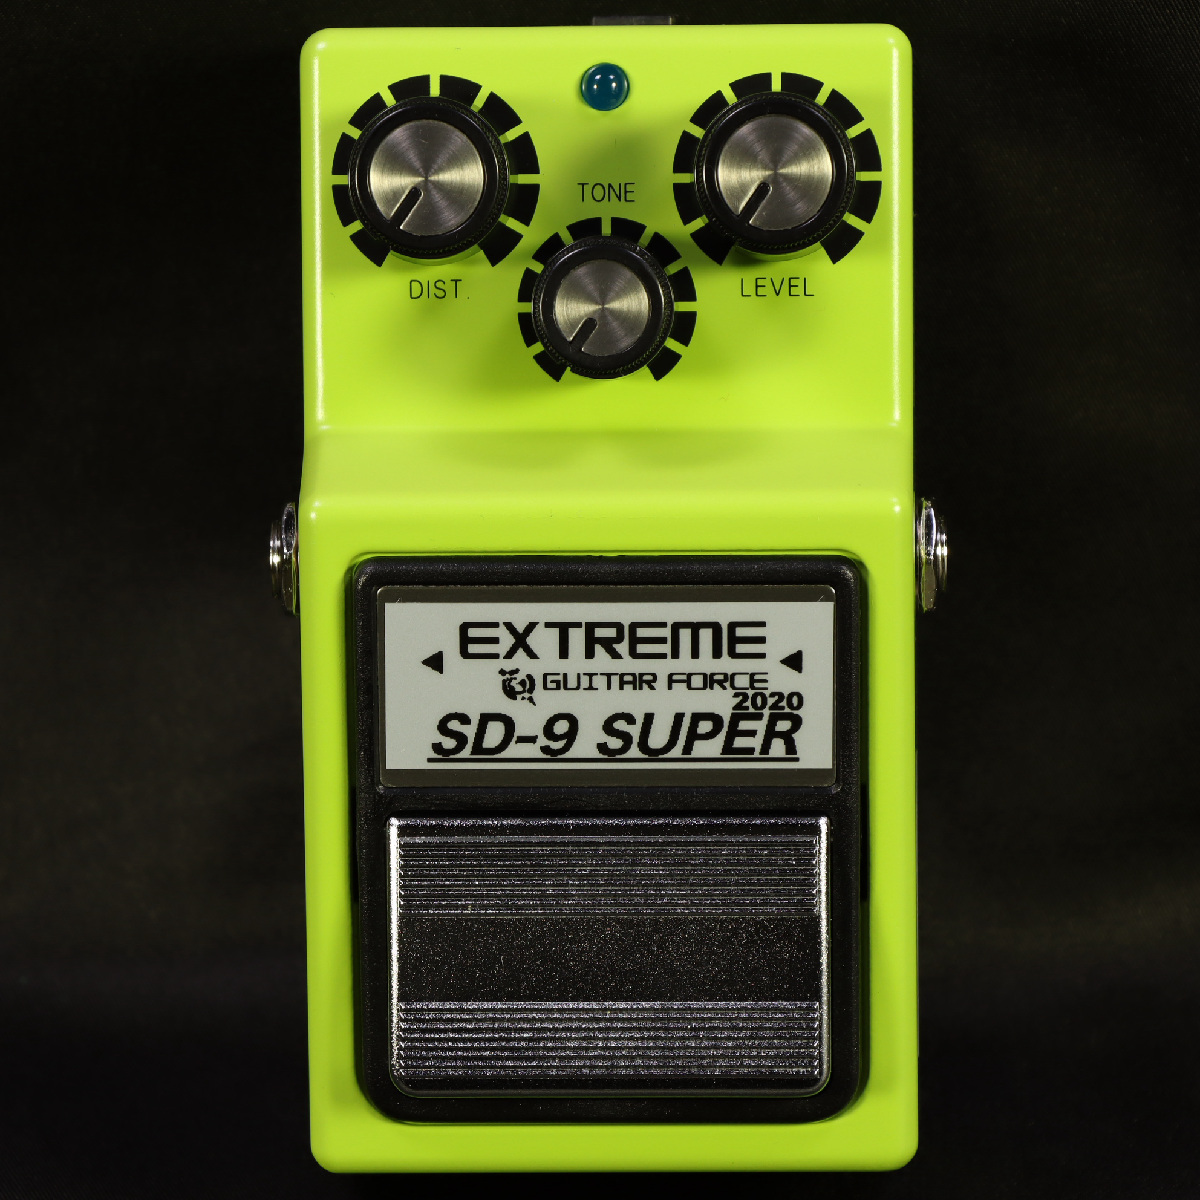 EXTREME GUITAR FORCE SD-9 SUPER 2020